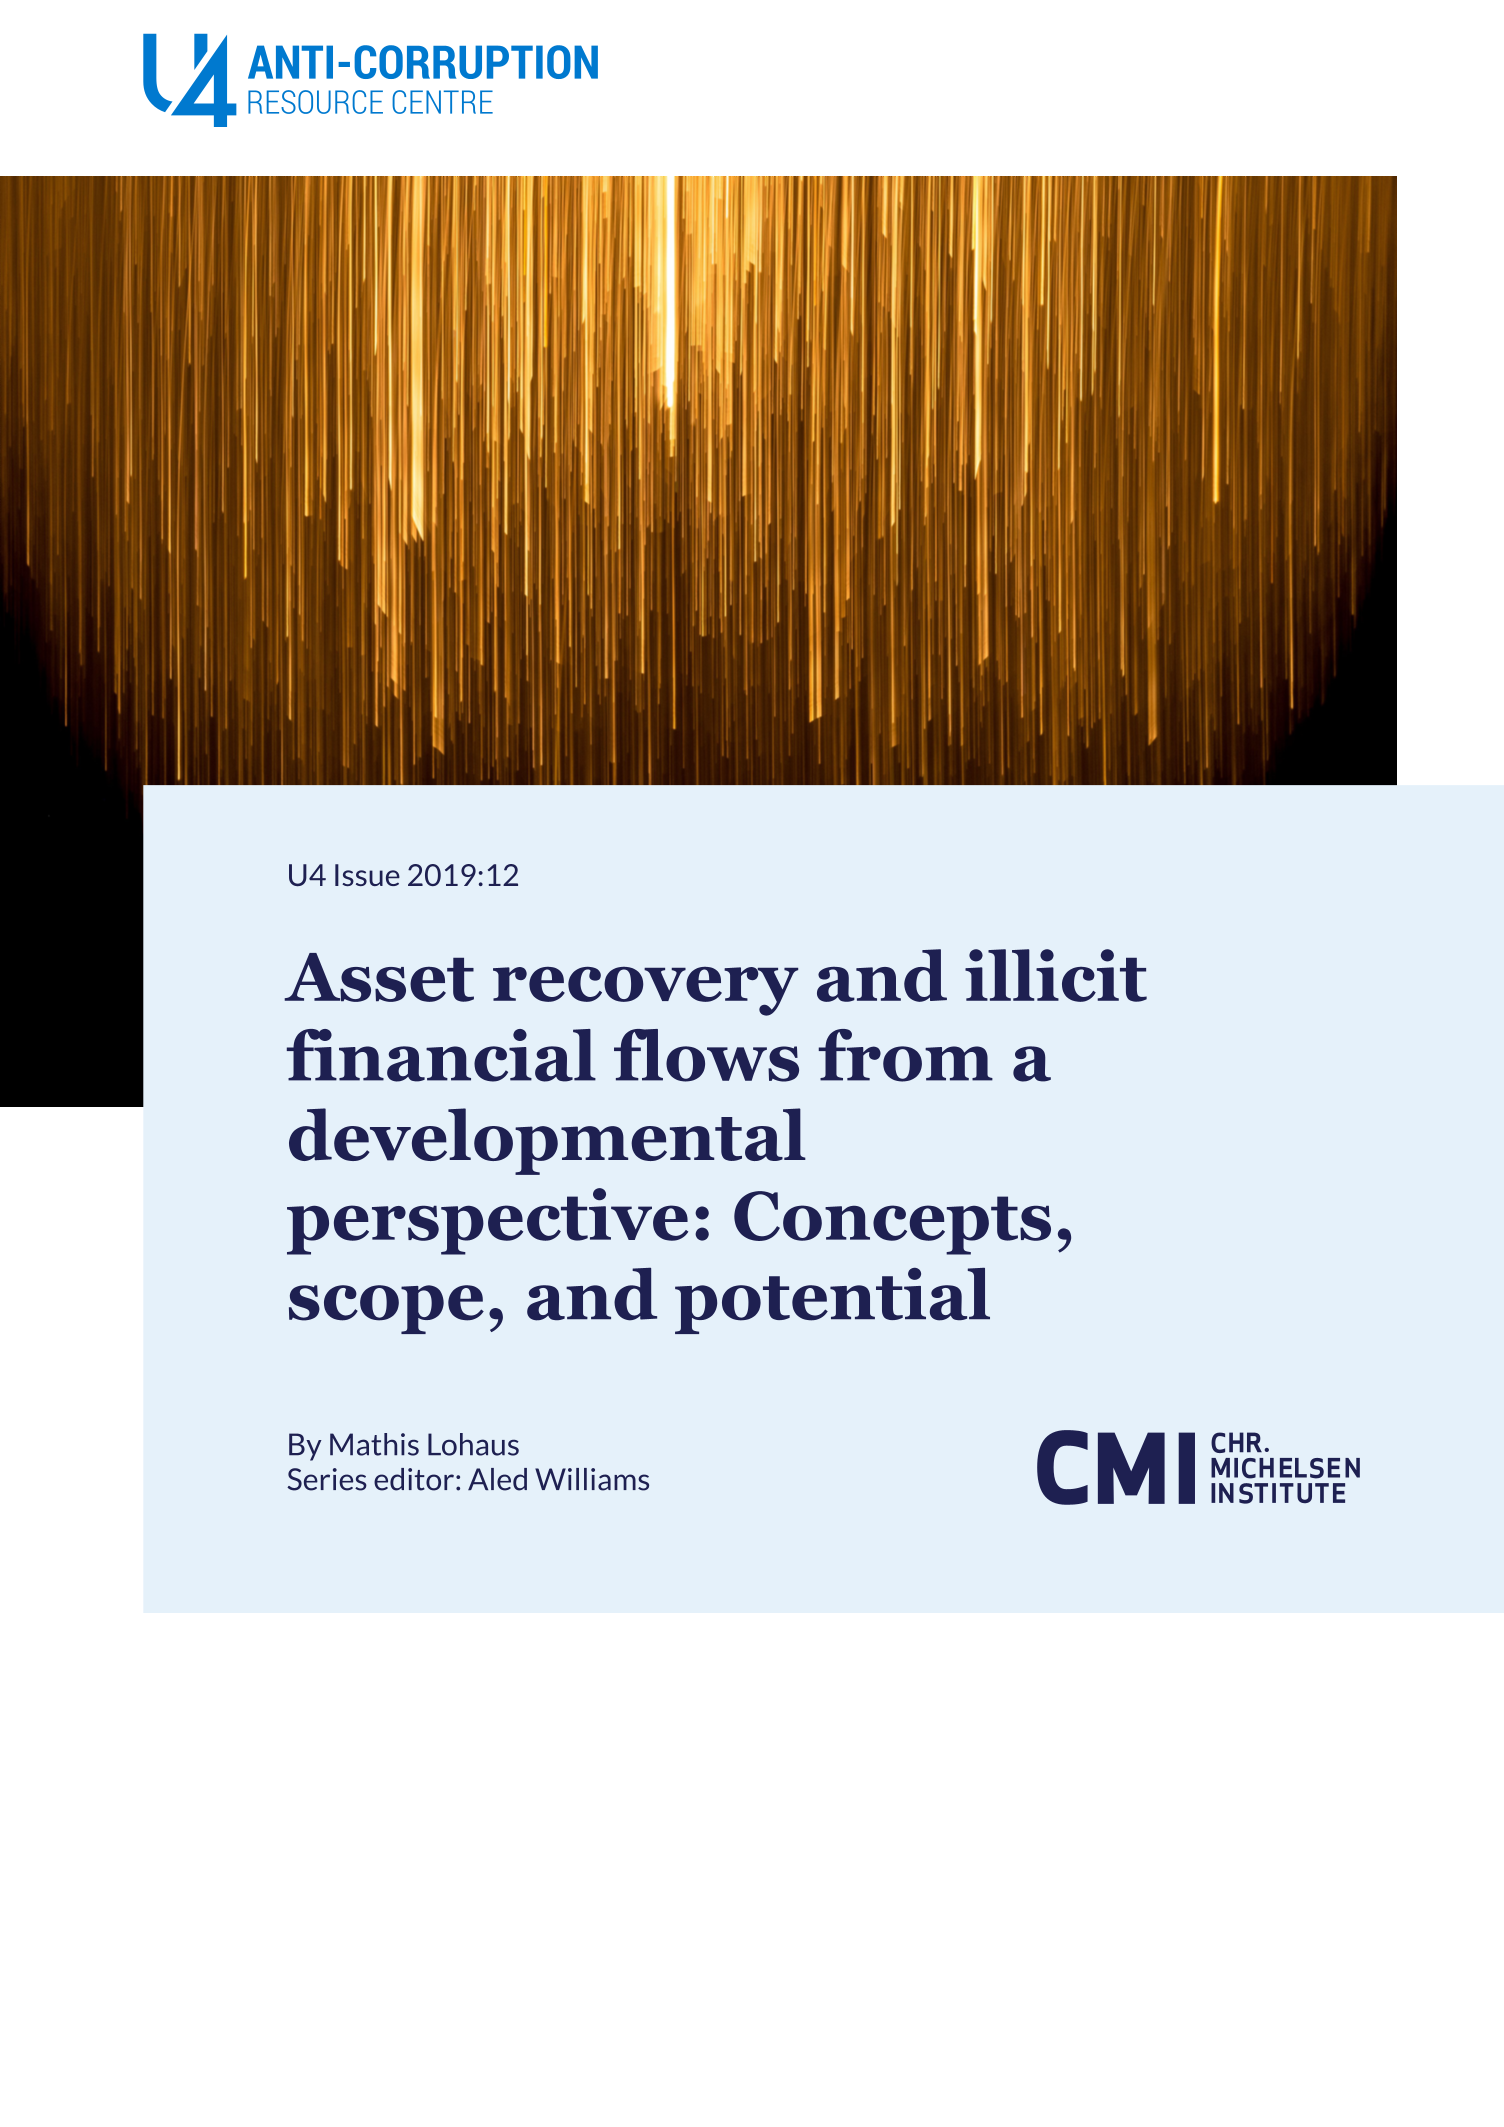 Asset recovery and illicit financial flows from a developmental perspective: Concepts, scope, and potential